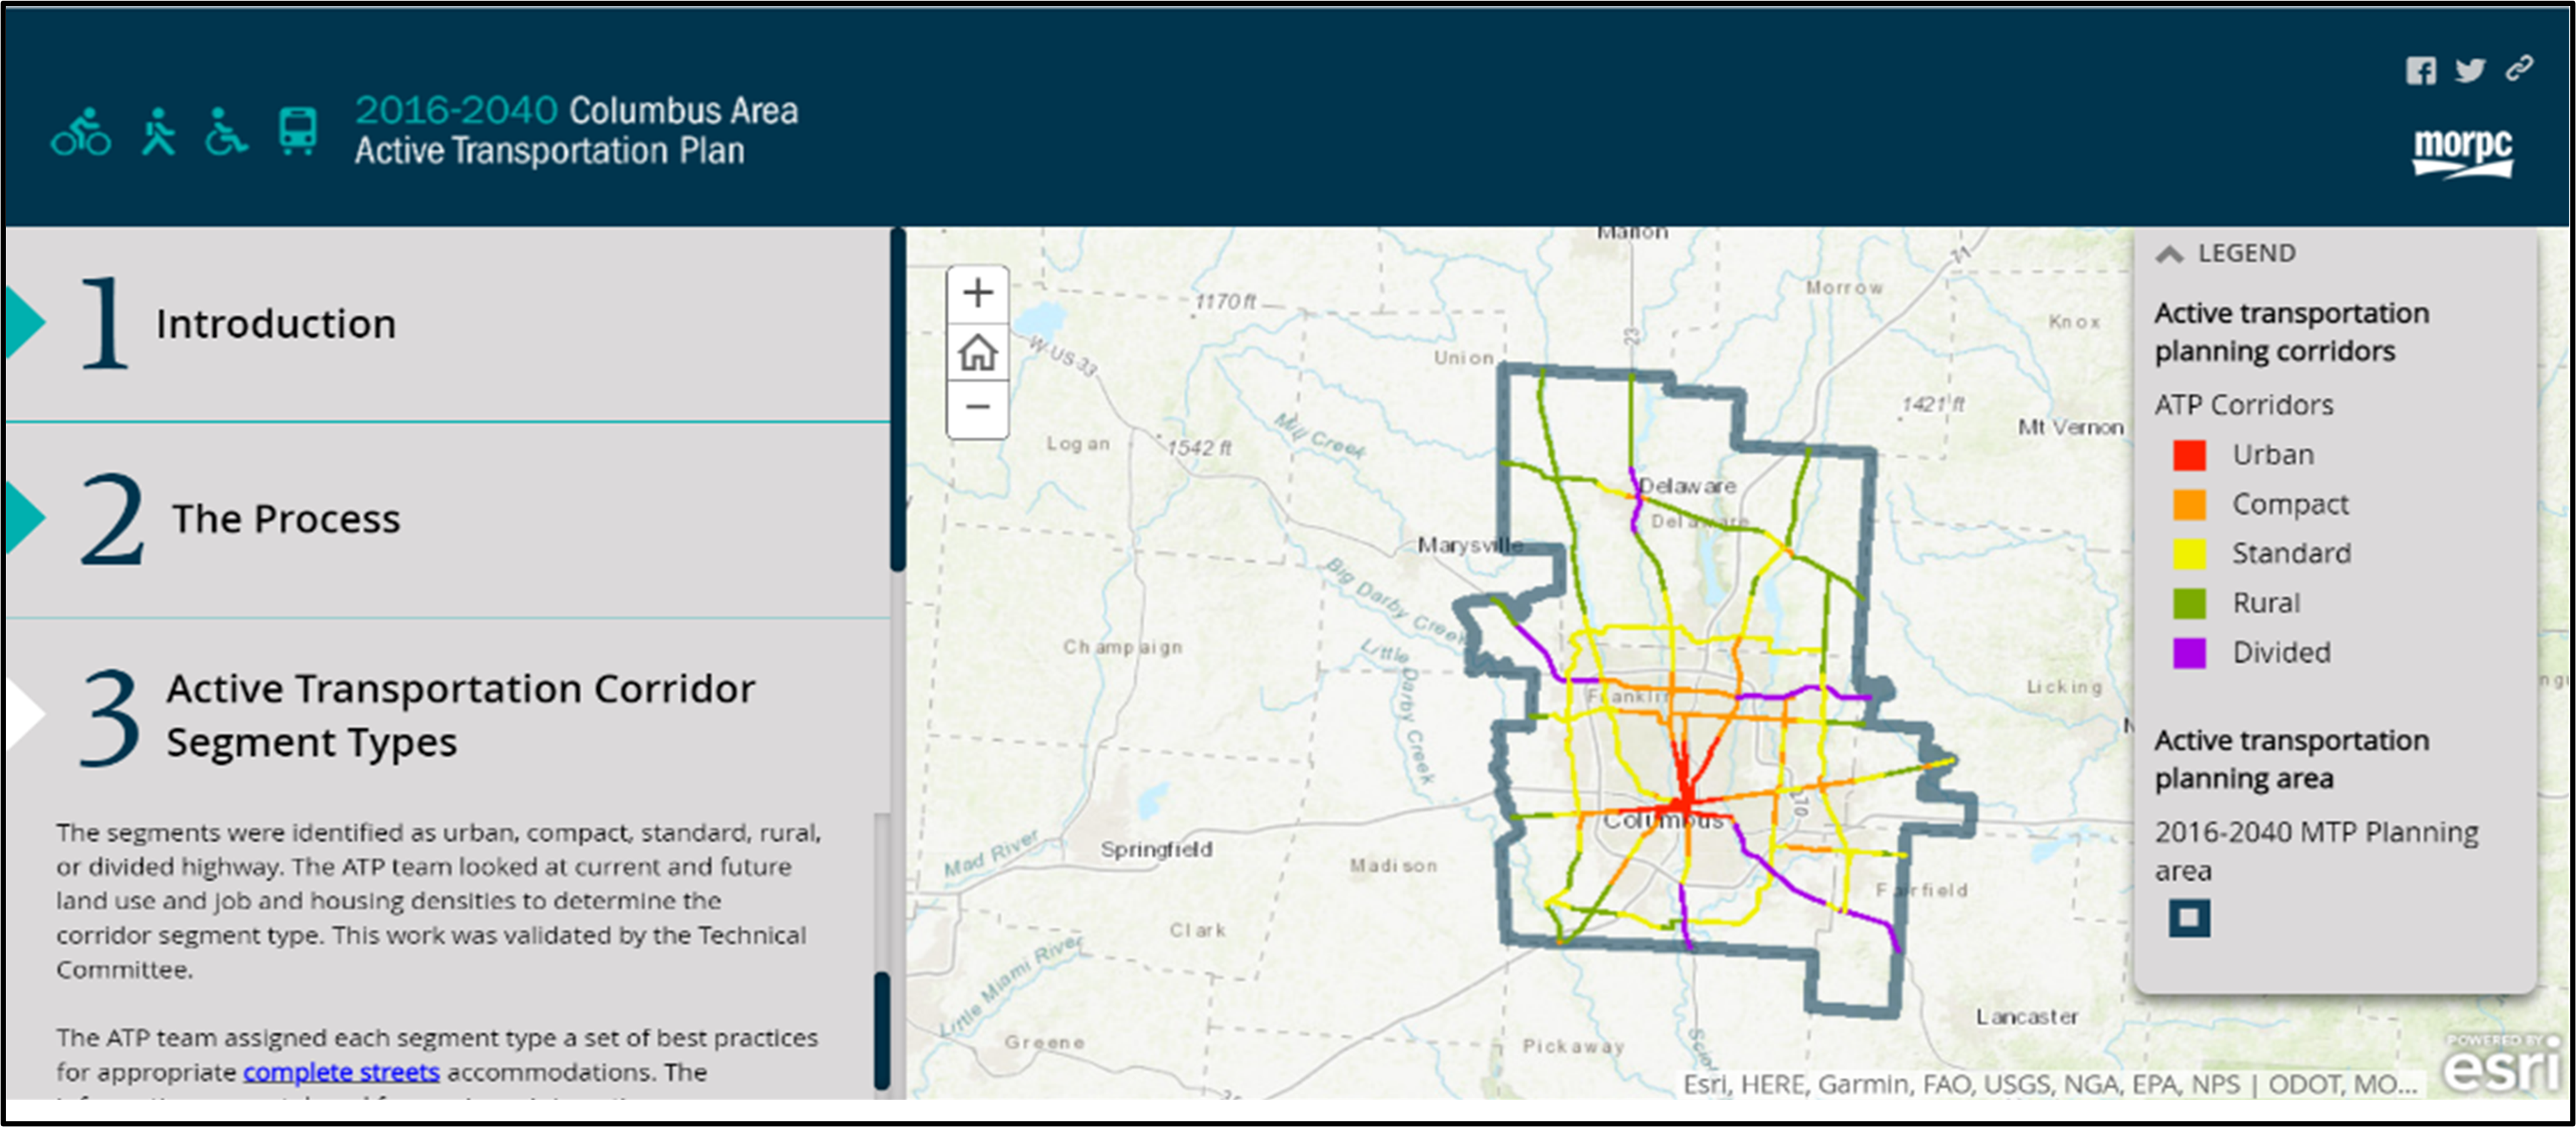 A screenshot of a map on the MORPC website highlighting the 2016-2040 Colombus area active transportation plan